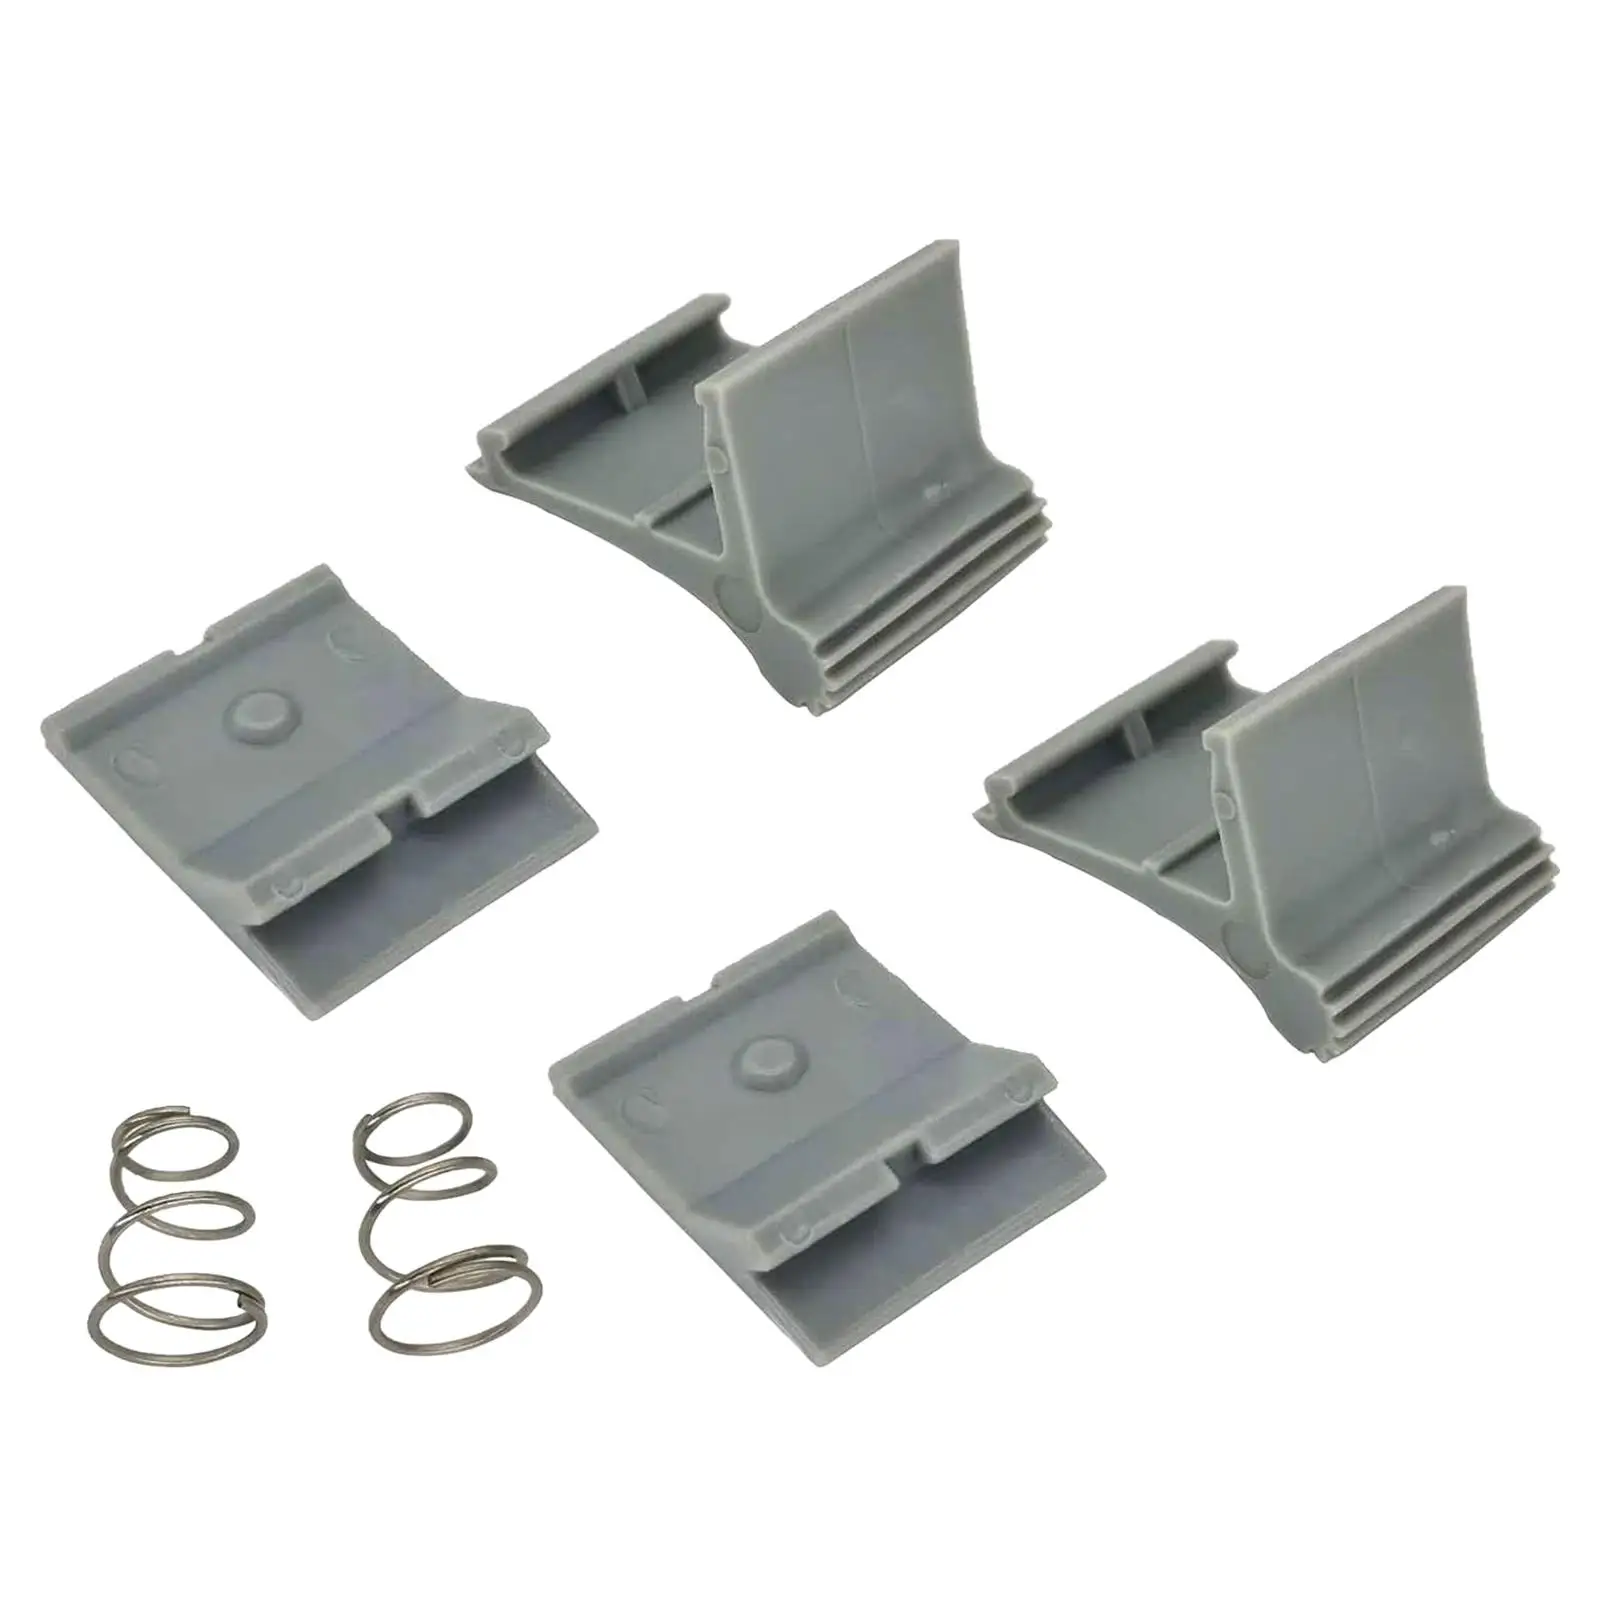 RV Awning Arm Slider Catch Set Spare Parts Durable Assembly Replaces Accessories Easy Installation for Camper Trailer